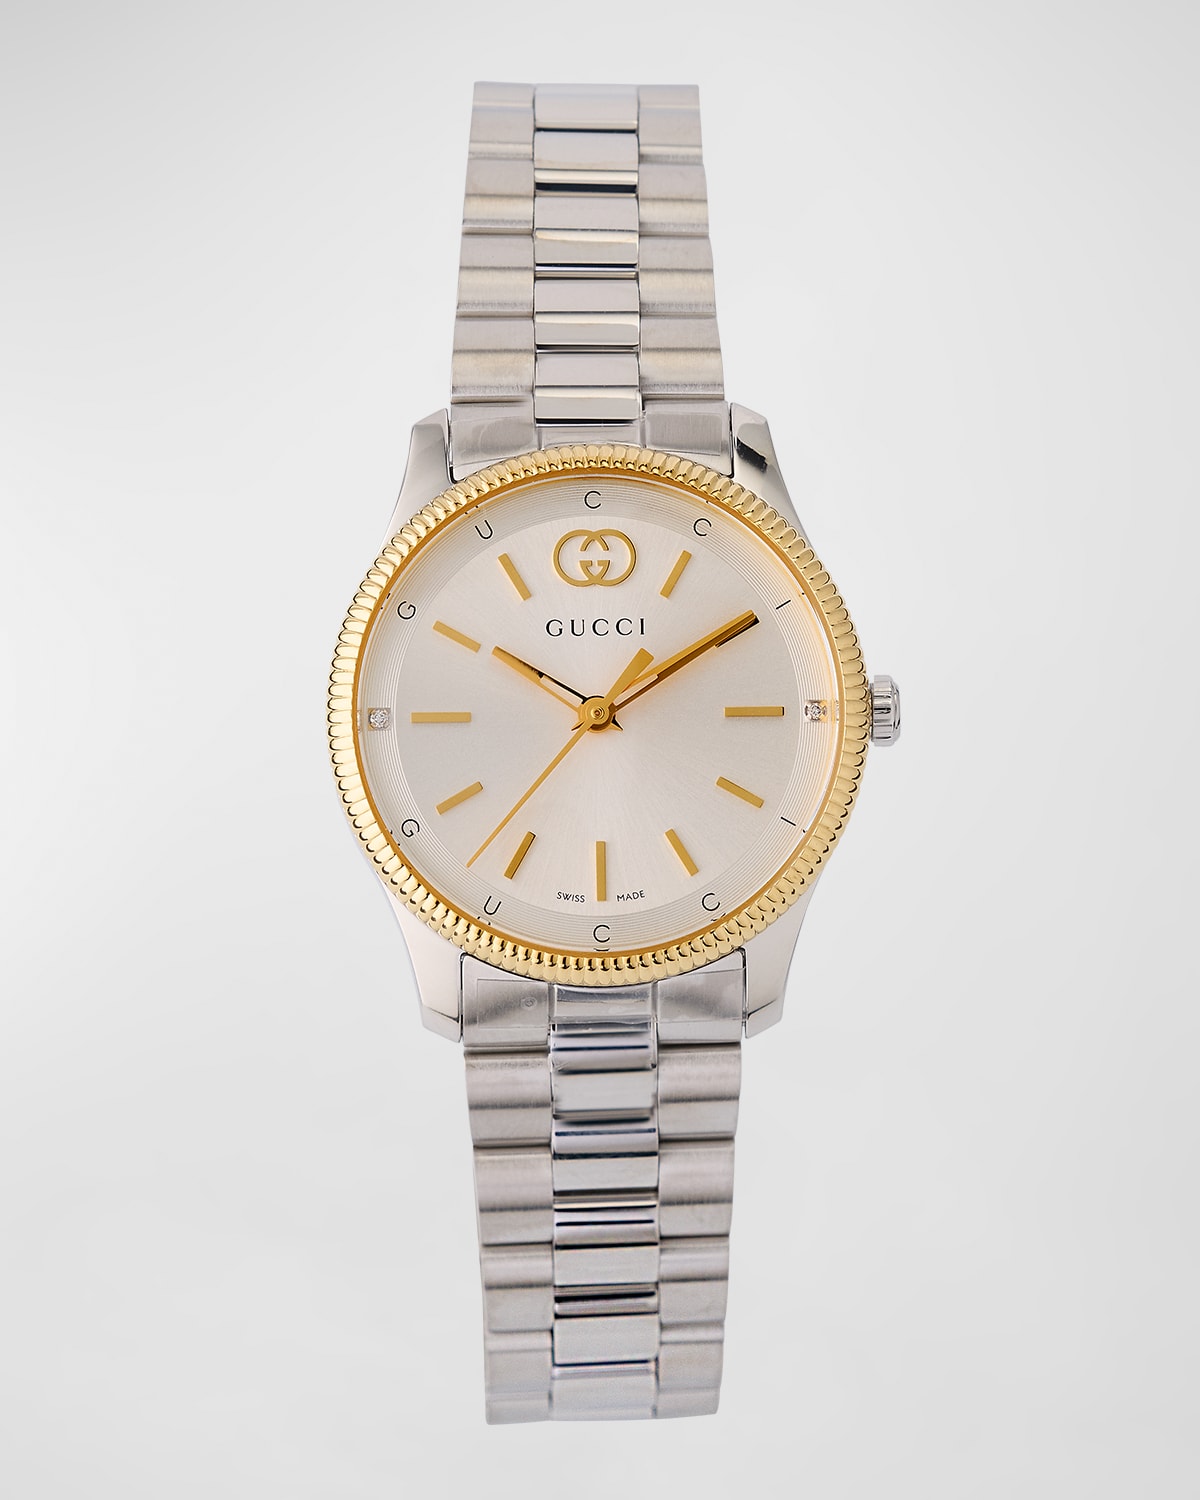 Gucci G-timeless Slim Watch With Bracelet Strap, Two Tone In Metallic